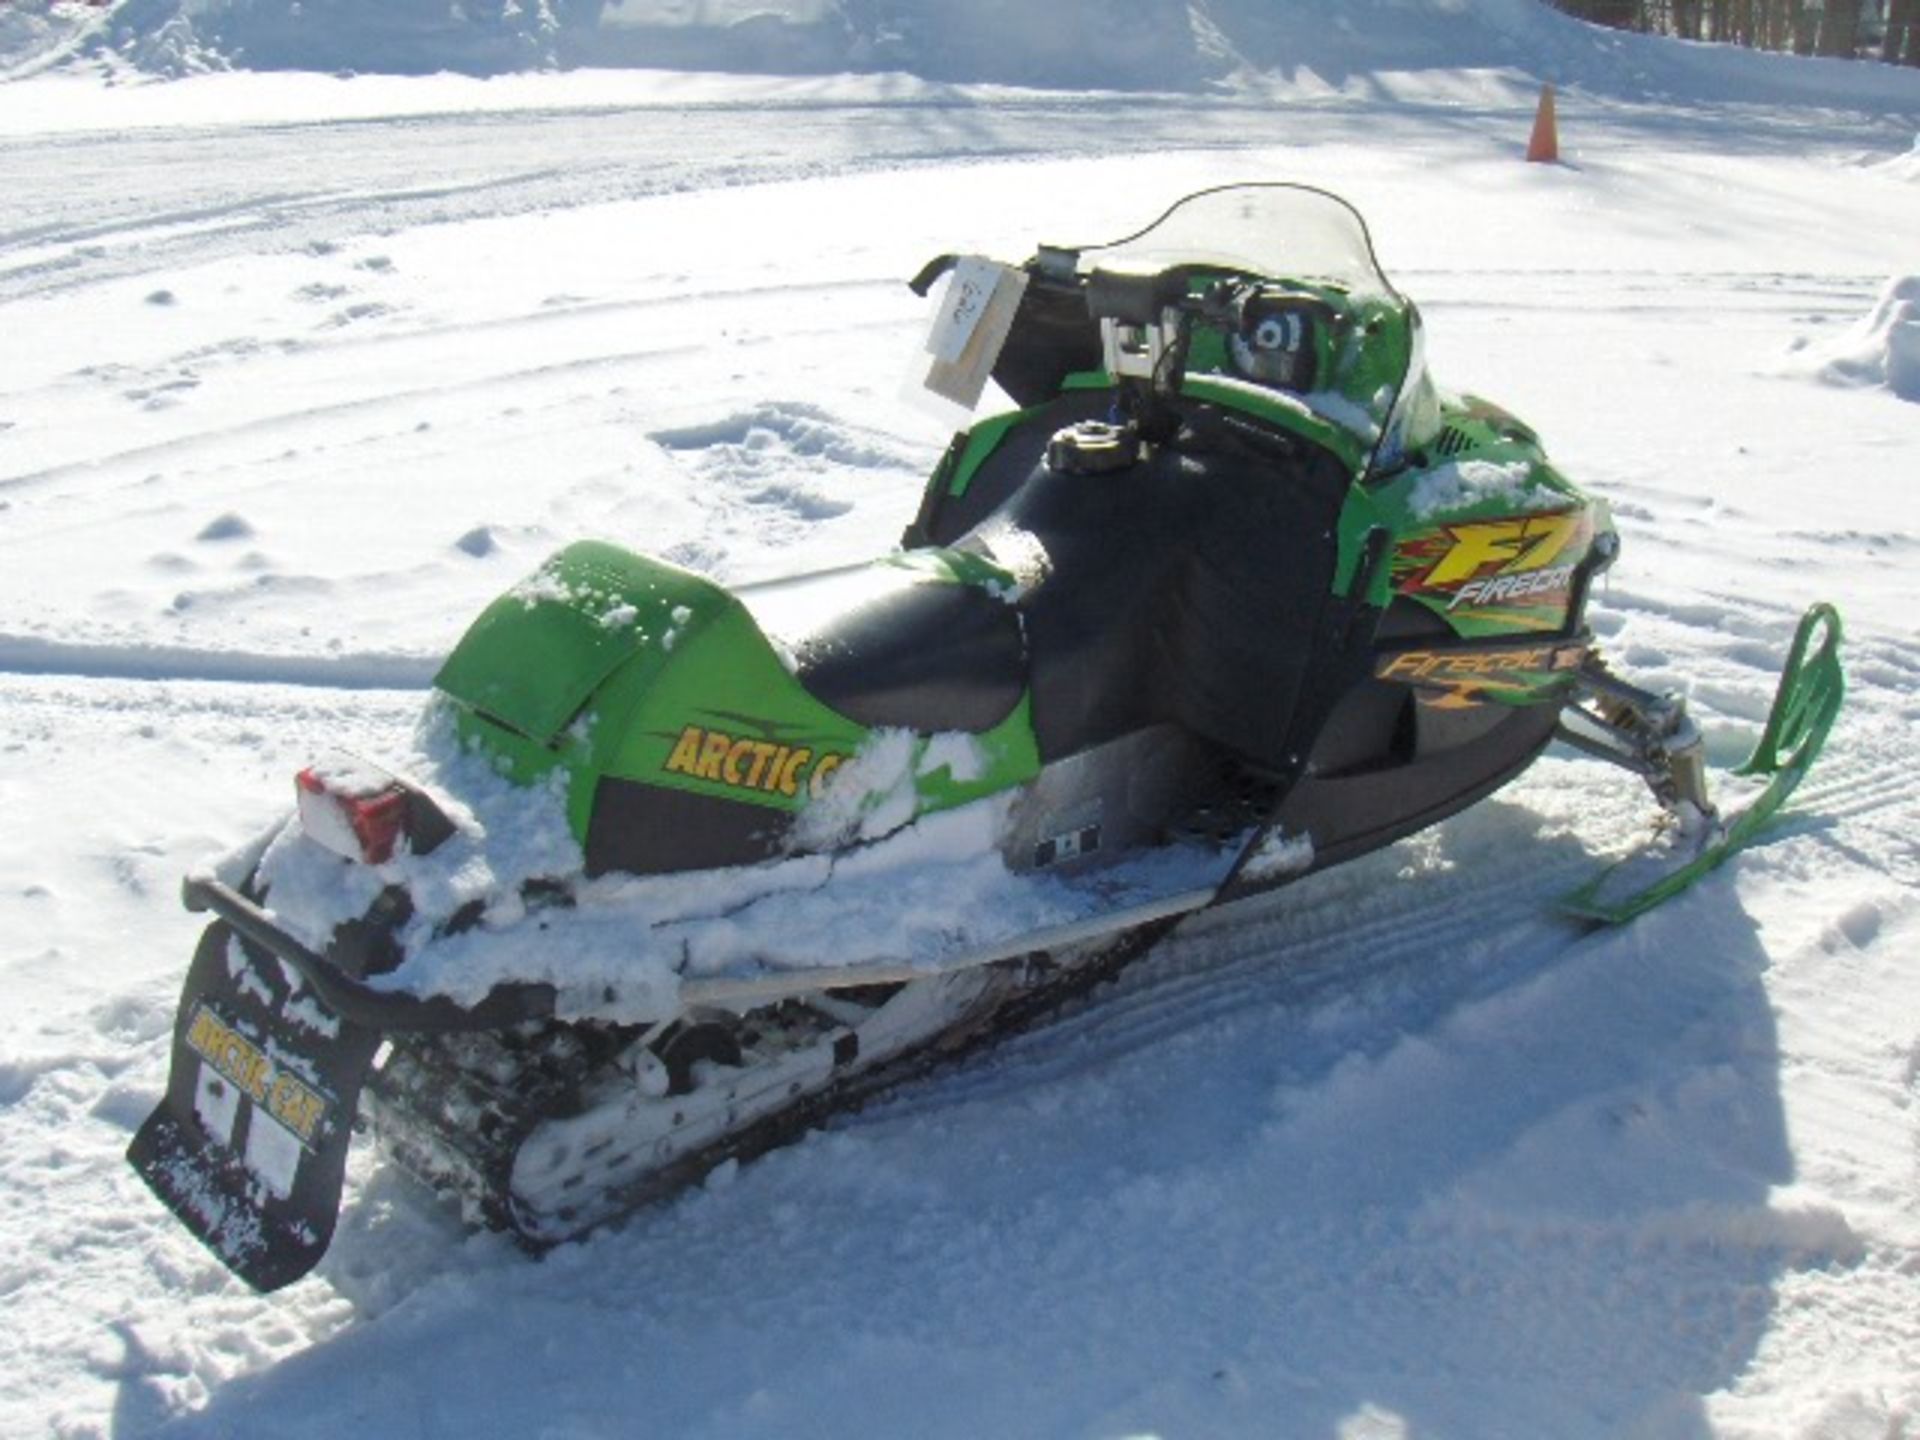 2004 ARCTIC CAT 700 F7  4UM04SNW54T138966 snowmobile, owner started at time of auction check in, - Image 3 of 4